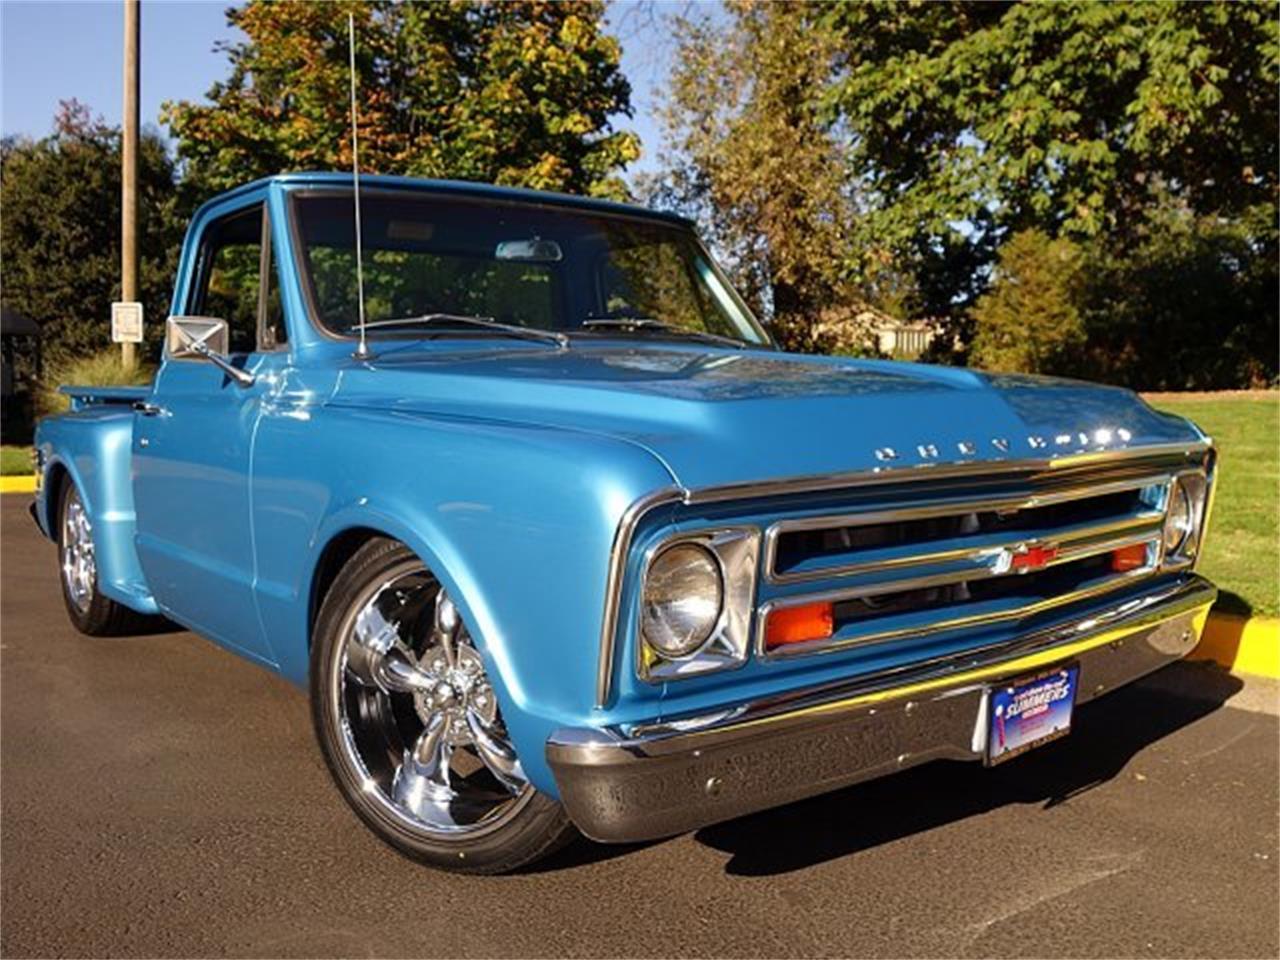 Marina Blue 1968 Chevrolet Pickup for sale located in Eugene, Oregon - $34,...